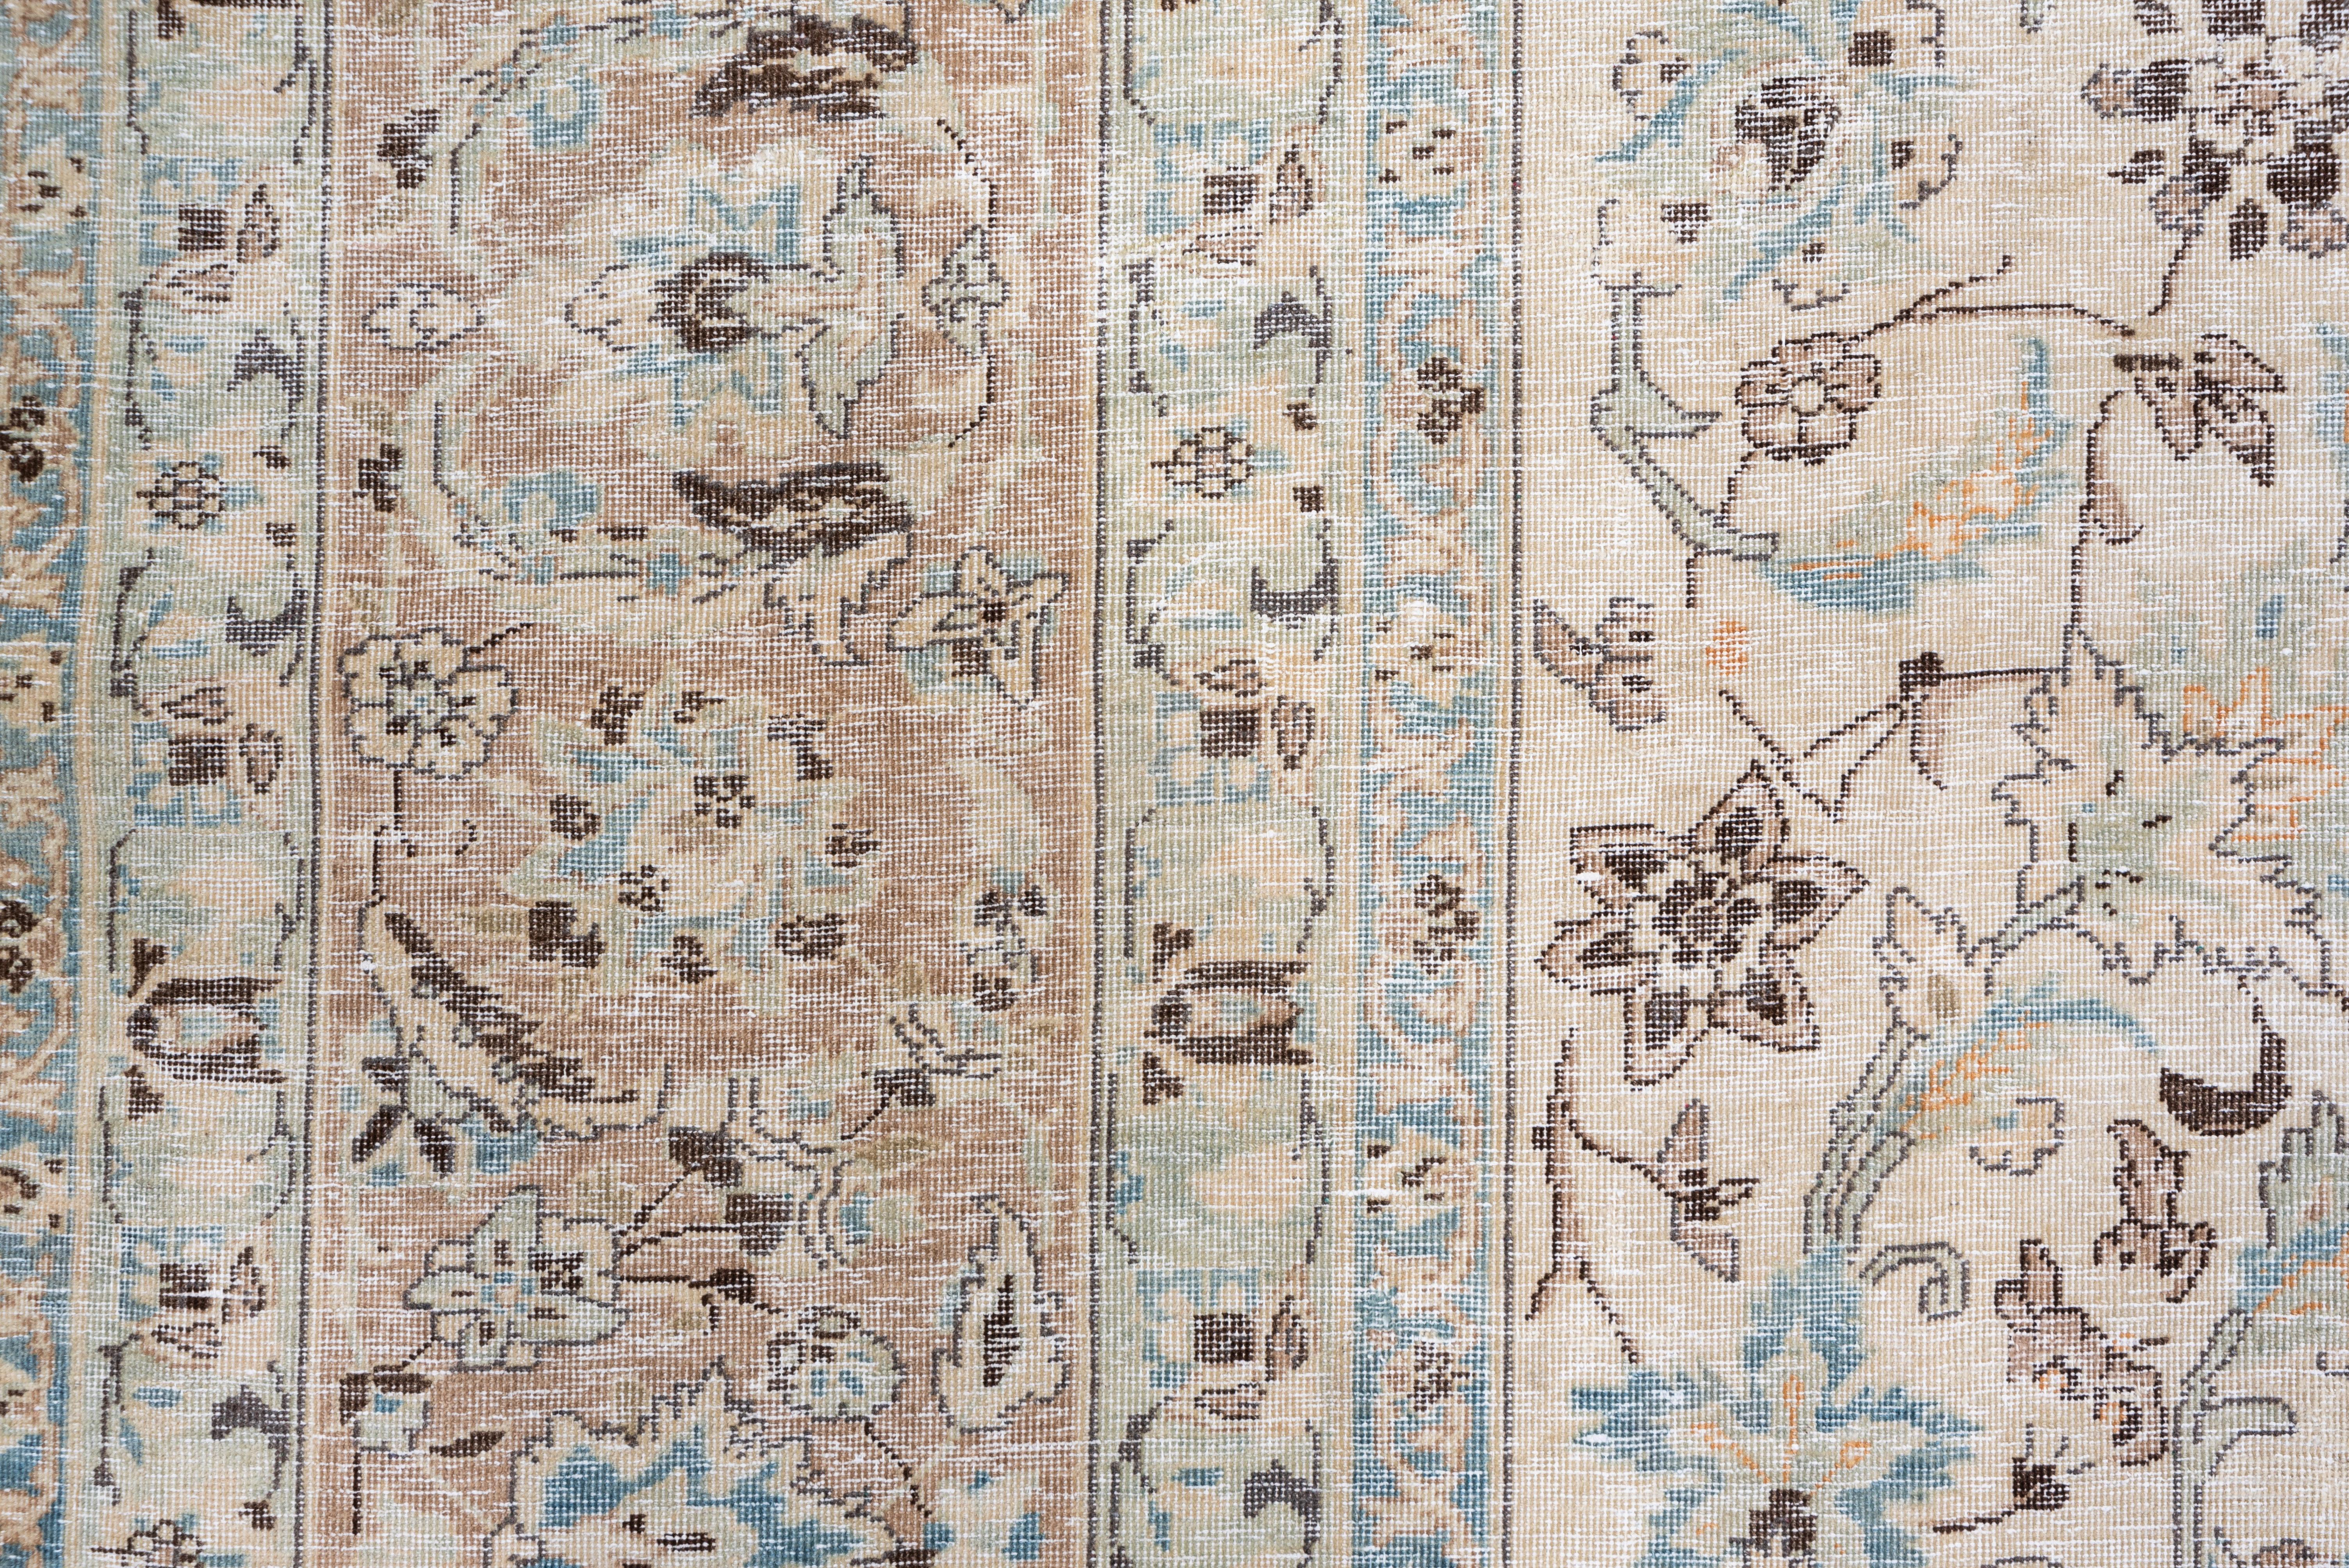 The sand ground of this well-woven NW Persian city carpet shows a centered pattern of wiry and broader arabesques, regular leaf palmettes and oak leaf palmettes and tulips. A pendant small octogramme within a concave open diamond focuses the pattern